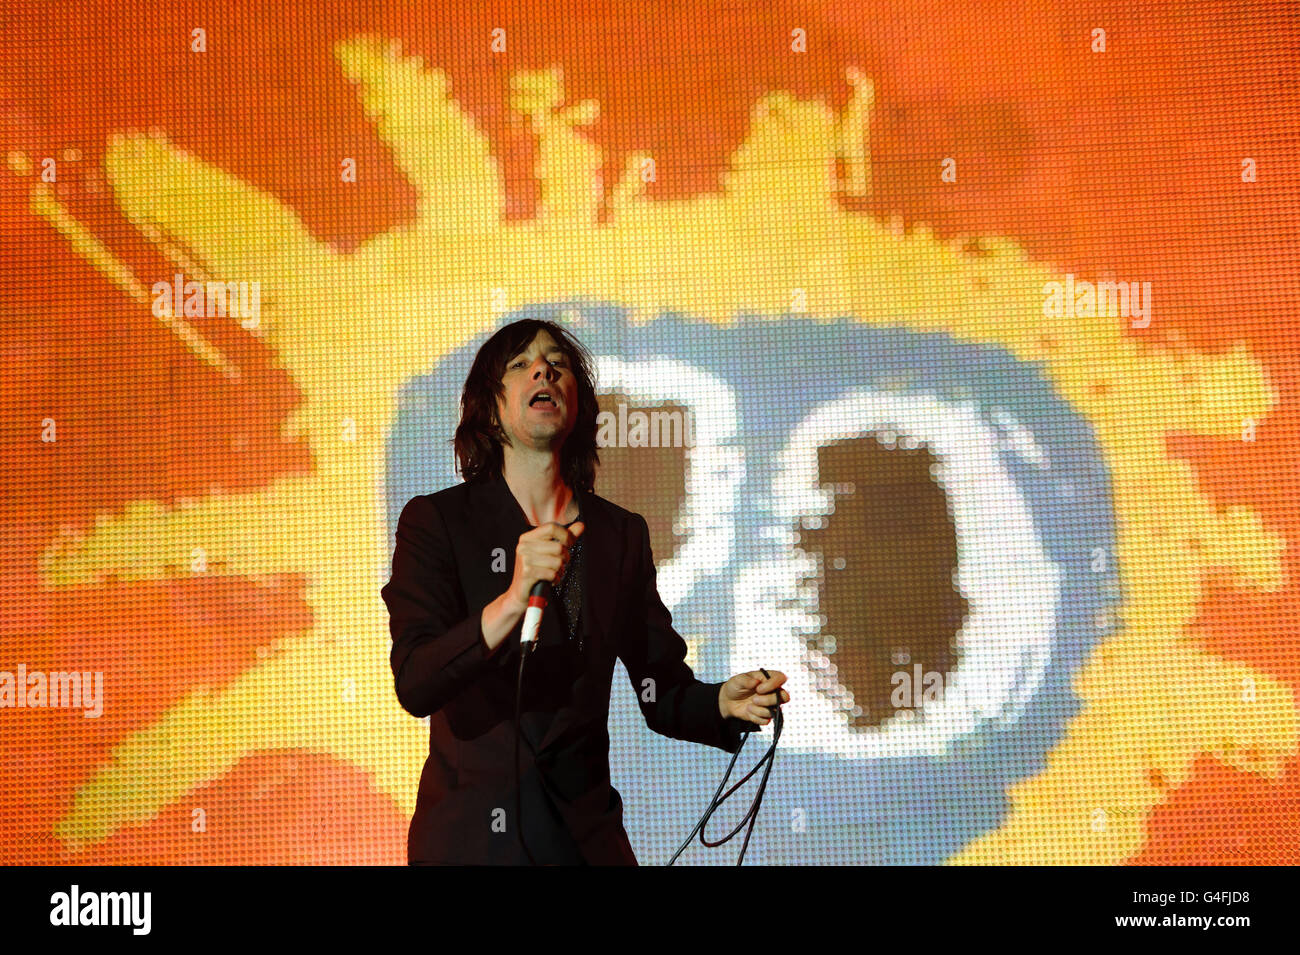 Bobby Gillespie of Primal Scream performs on the 4 Music stage at the V Festival in Chelmsford, Essex. Stock Photo